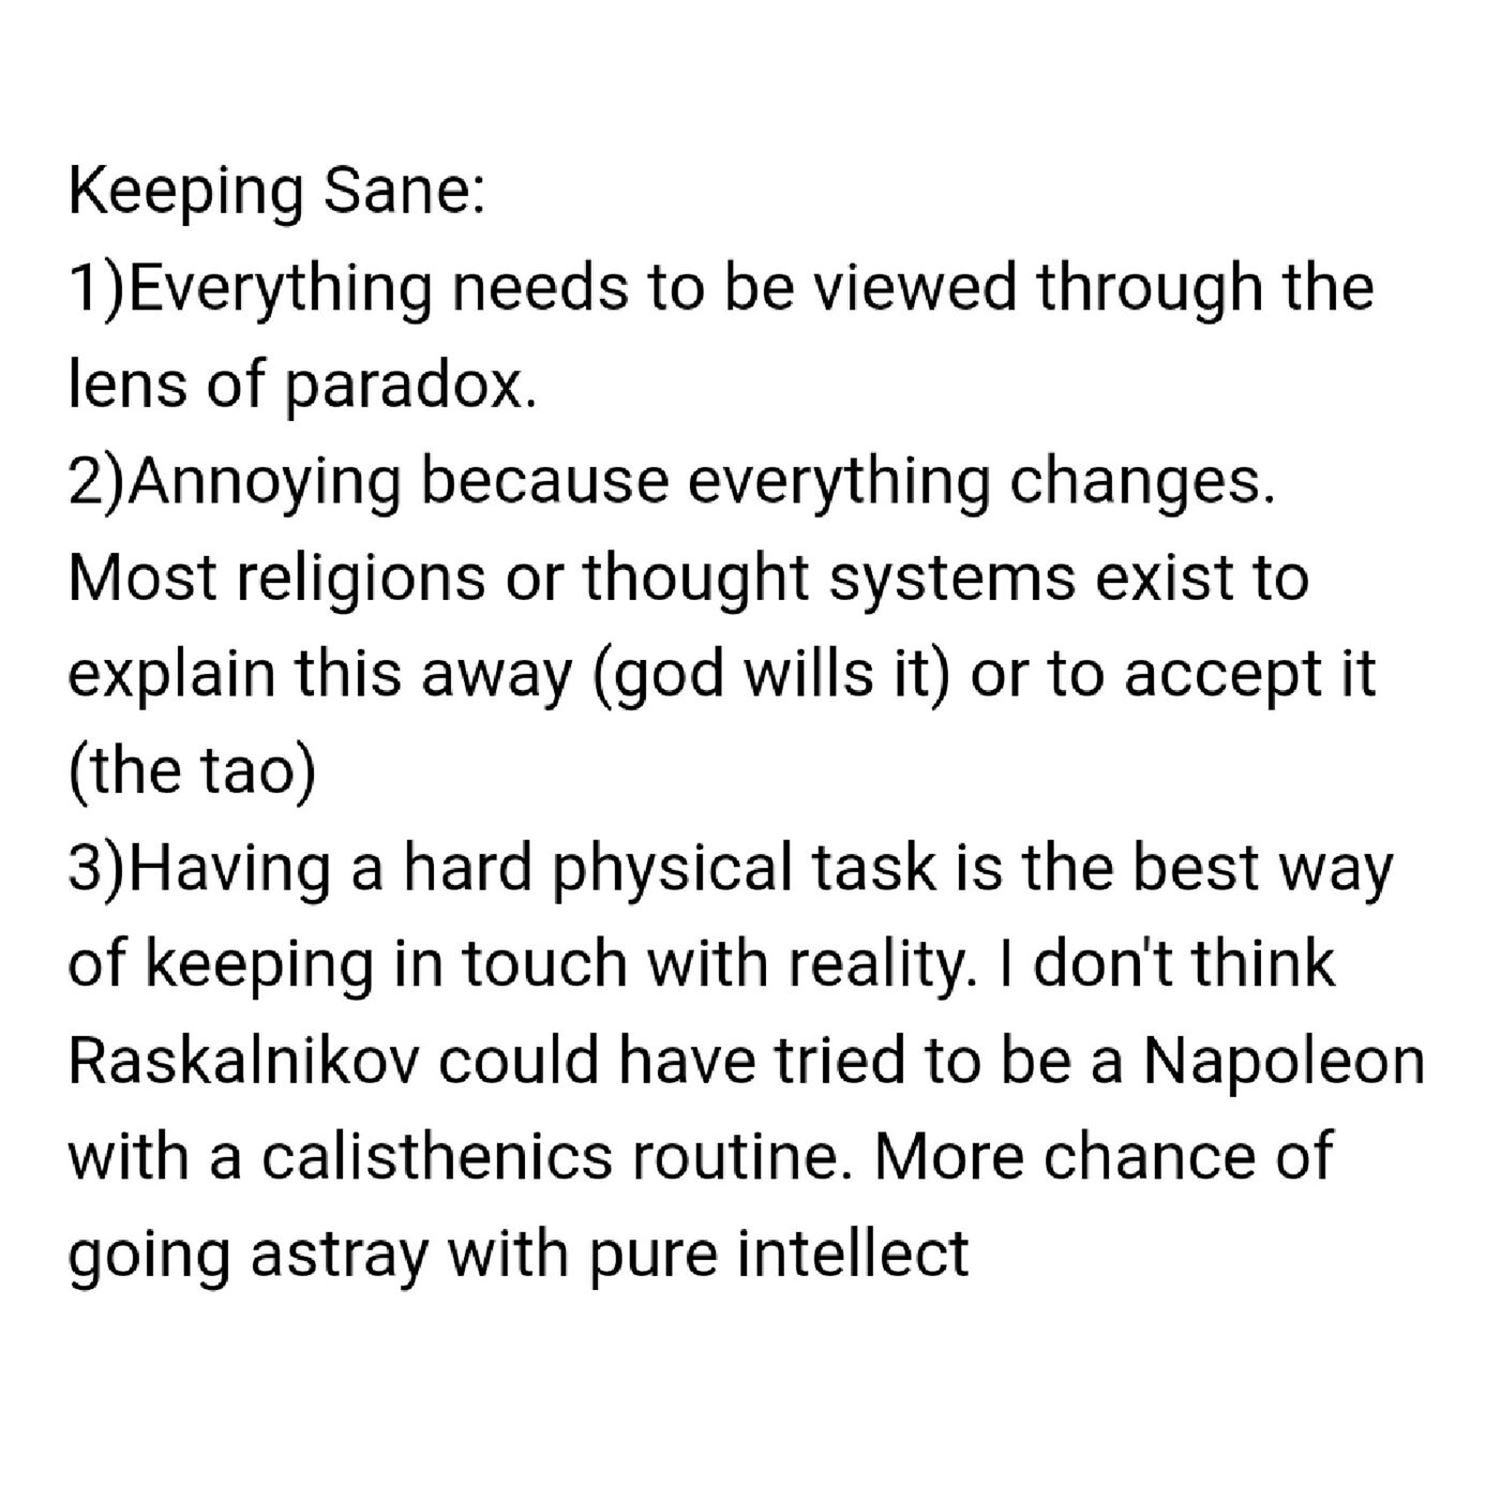 Keeping sane & living in reality